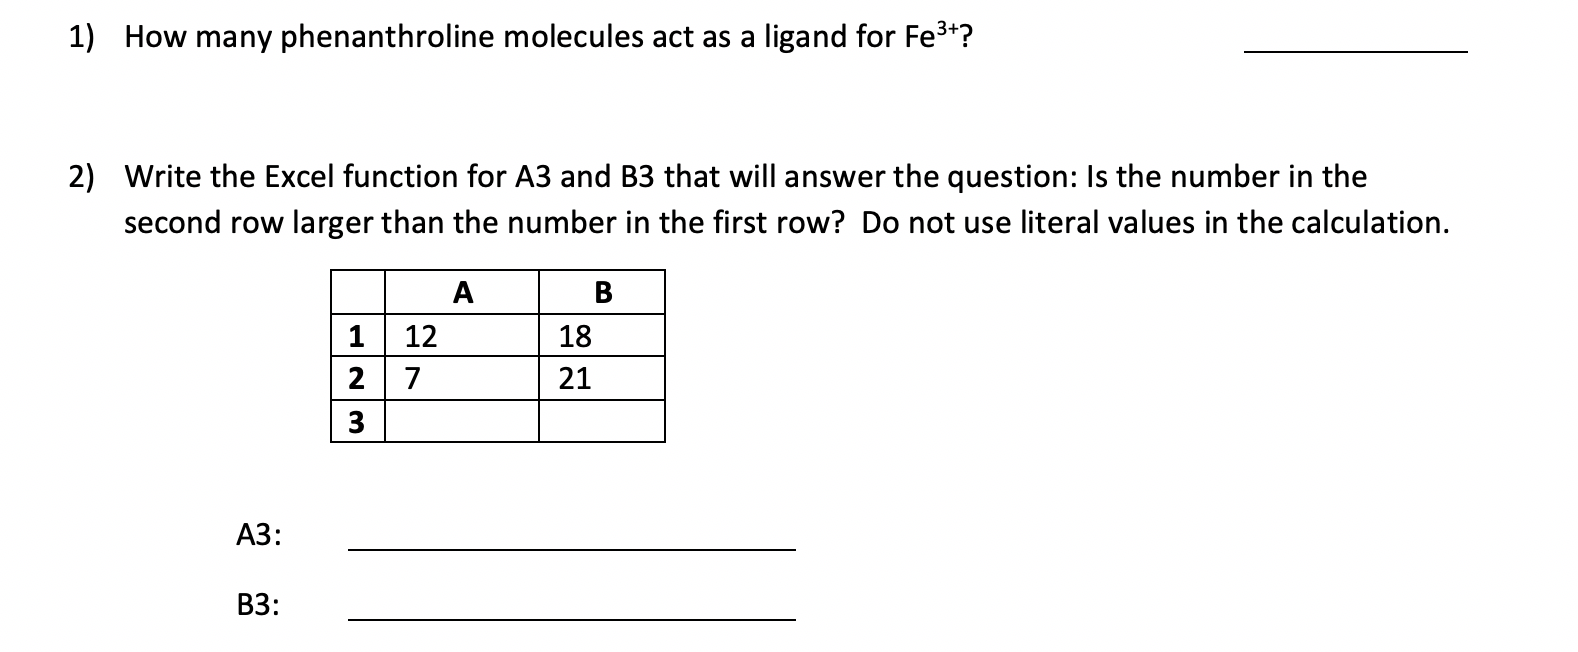 1) How many phenanthroline molecules act as a ligand for Fe3+?
2) Write the Excel function for A3 and B3 that will answer the question: Is the number in the
second row larger than the number in the first row? Do not use literal values in the calculation.
12
18
2
21
3
A3:
B3:
